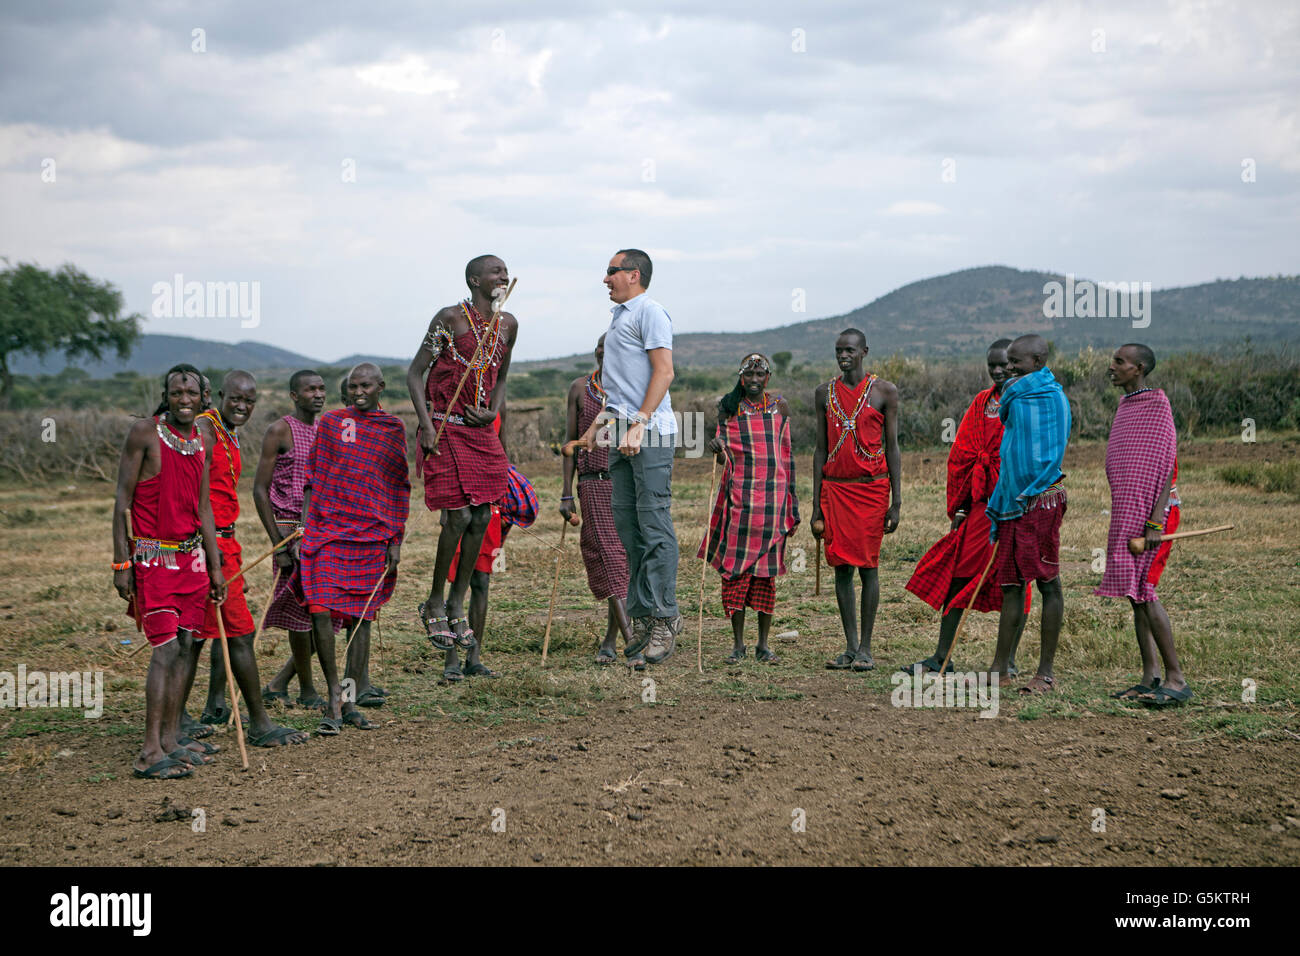 Group of Maasai warriors and one tourist doing a ceremonial dance in a Maasai village, Kenya, Africa. Stock Photo